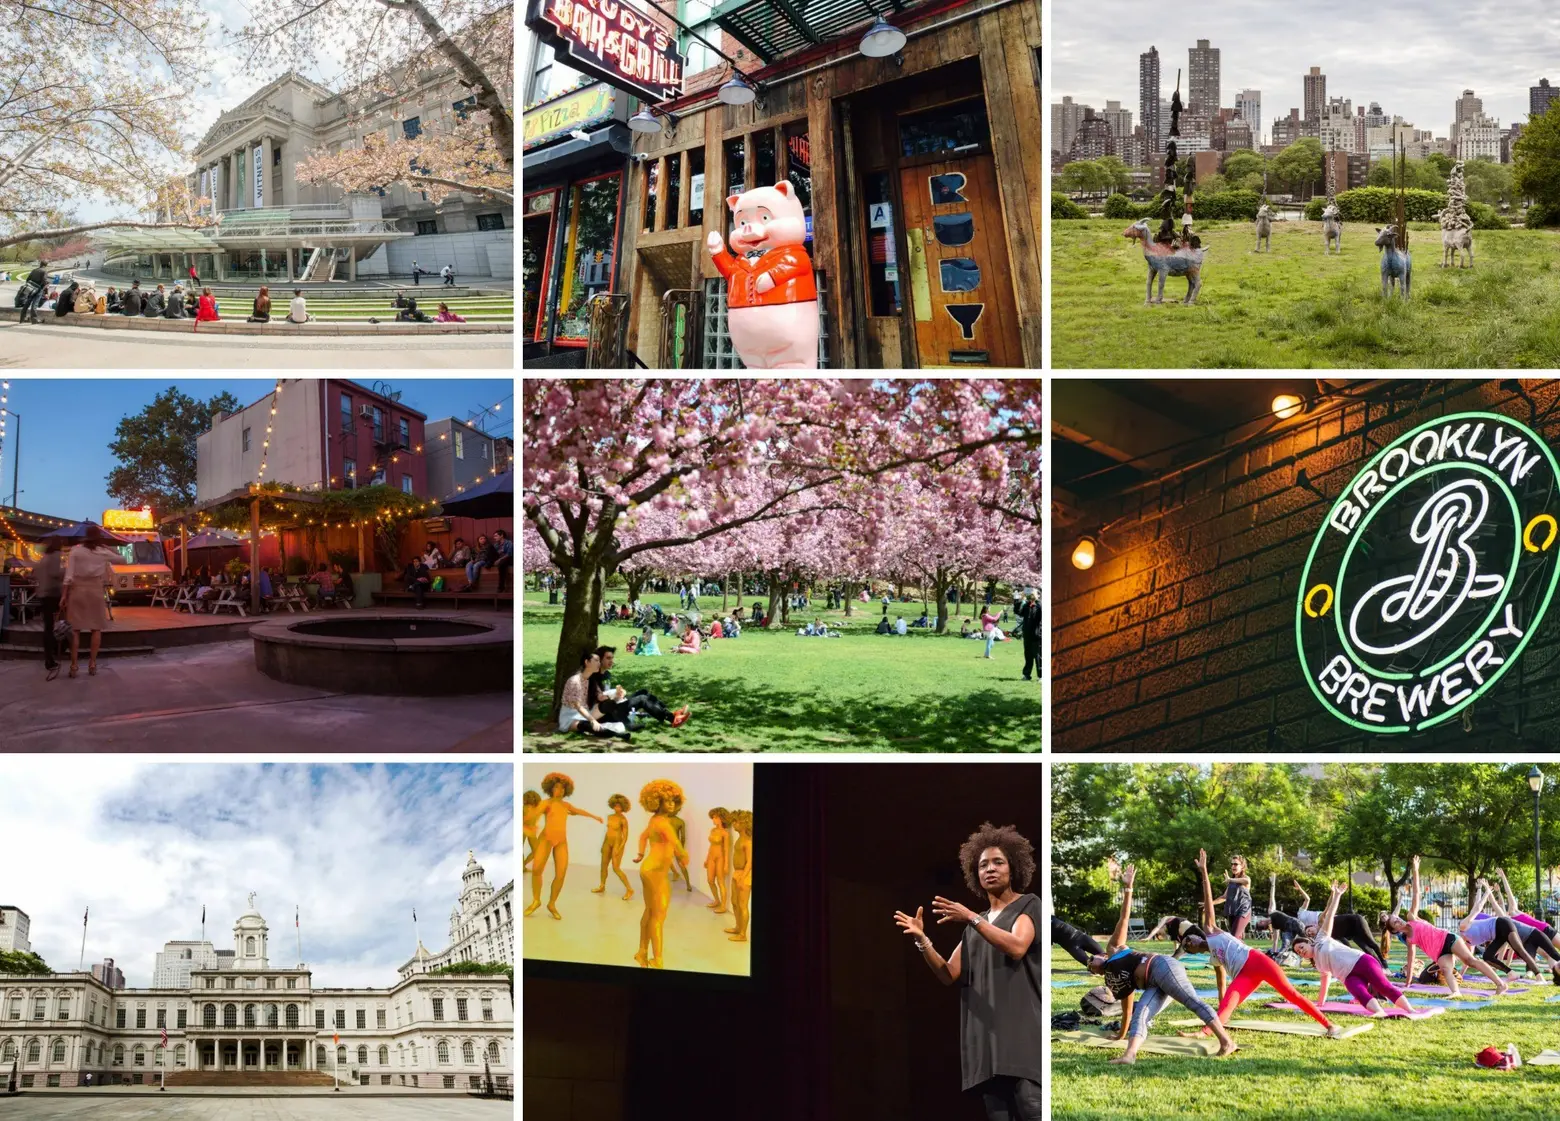 100 free things to do in New York City